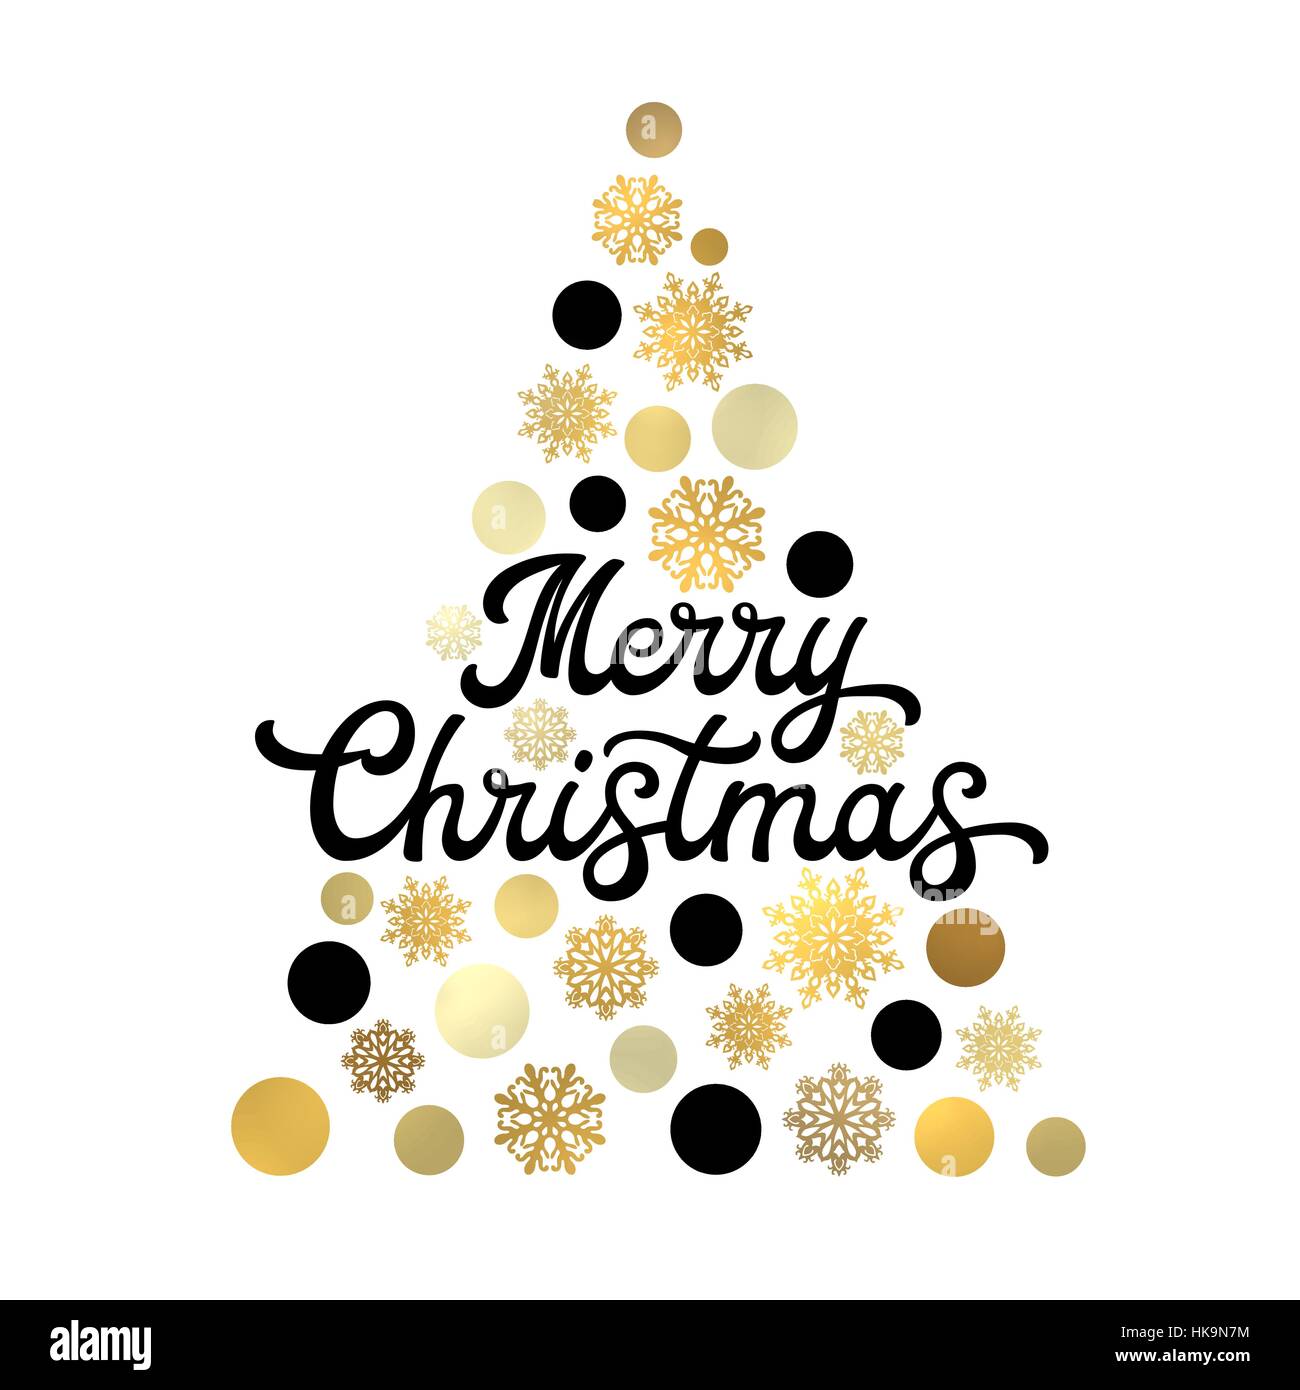 Stylized Christmas tree isolated on white background with trendy black hand lettering design. Stylish Xmas card with golden circles and snowflakes. Seasons greetings vector font illustration. Stock Vector